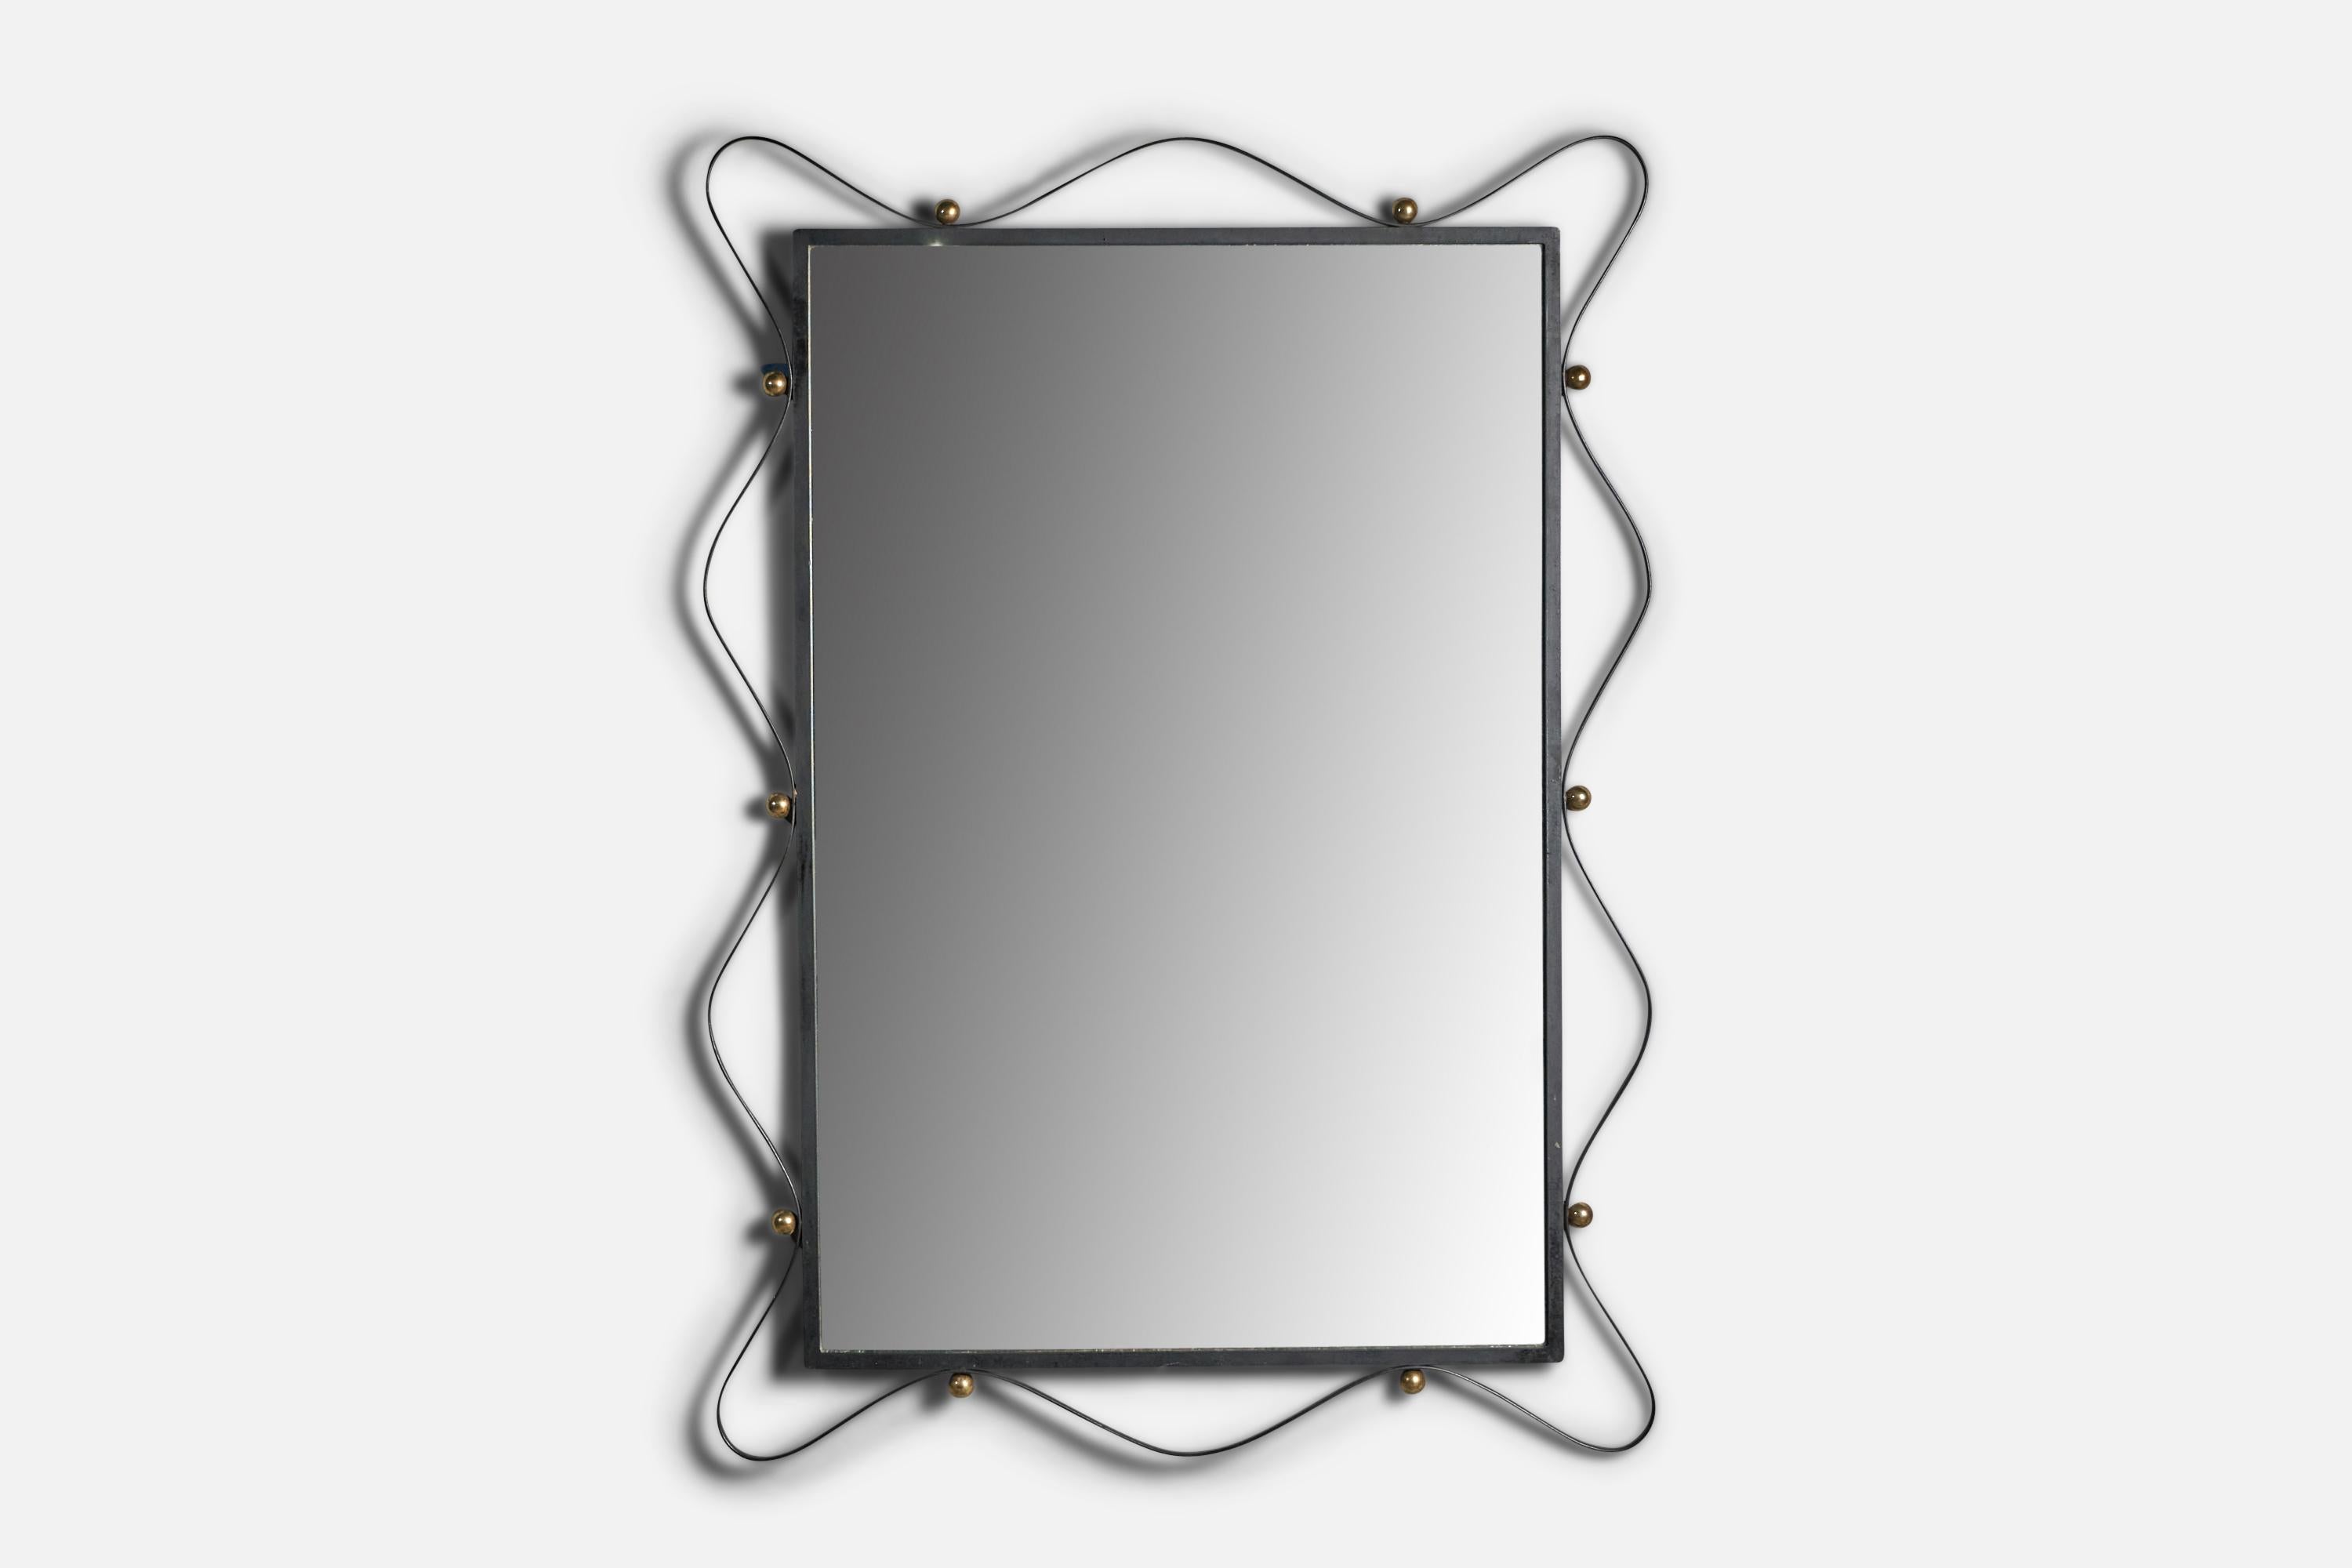 A sizeable black-lacquered metal and brass wall mirror, designed and produced in the US, c. 1950s.